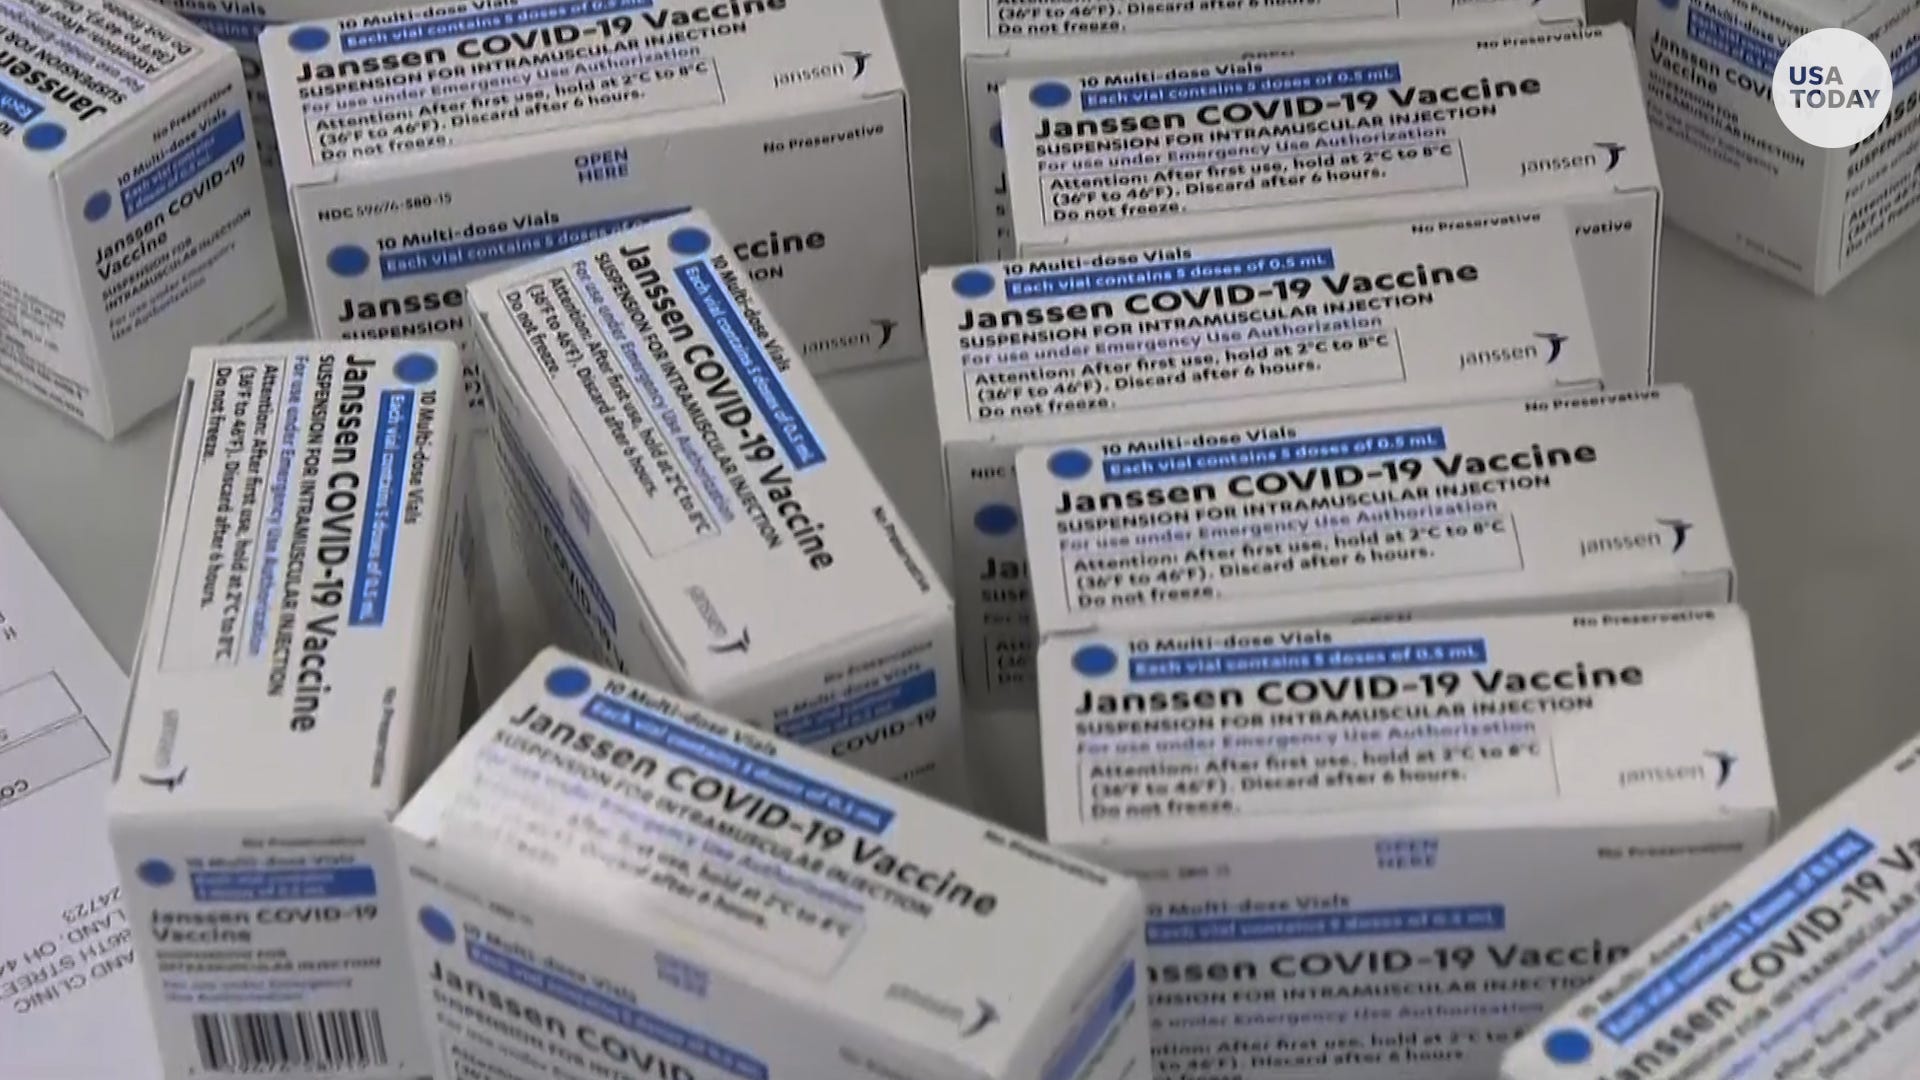 1m Coronavirus Vaccine Doses Later What S Next For Louisiana A Boost From Johnson Johnson